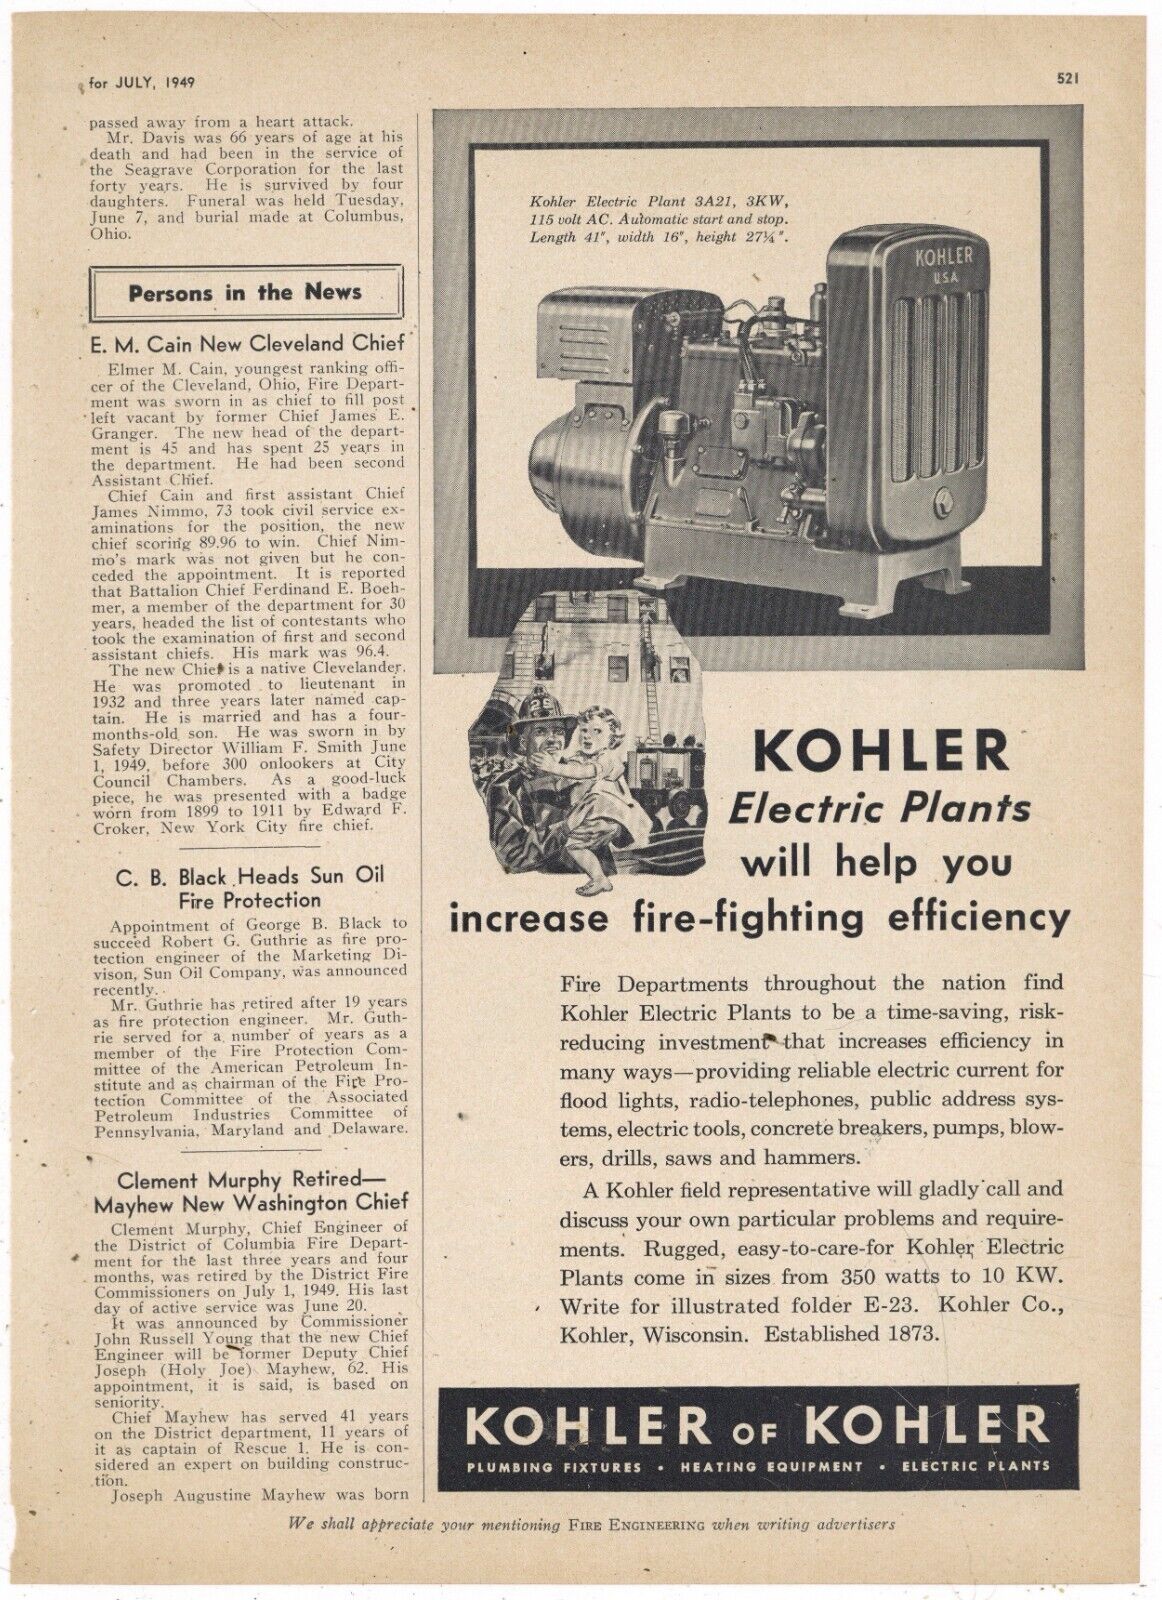 1949 Koehler of Koehler Ad: Electric Power Plant Model 3A21, 3KW for Fire Depts.